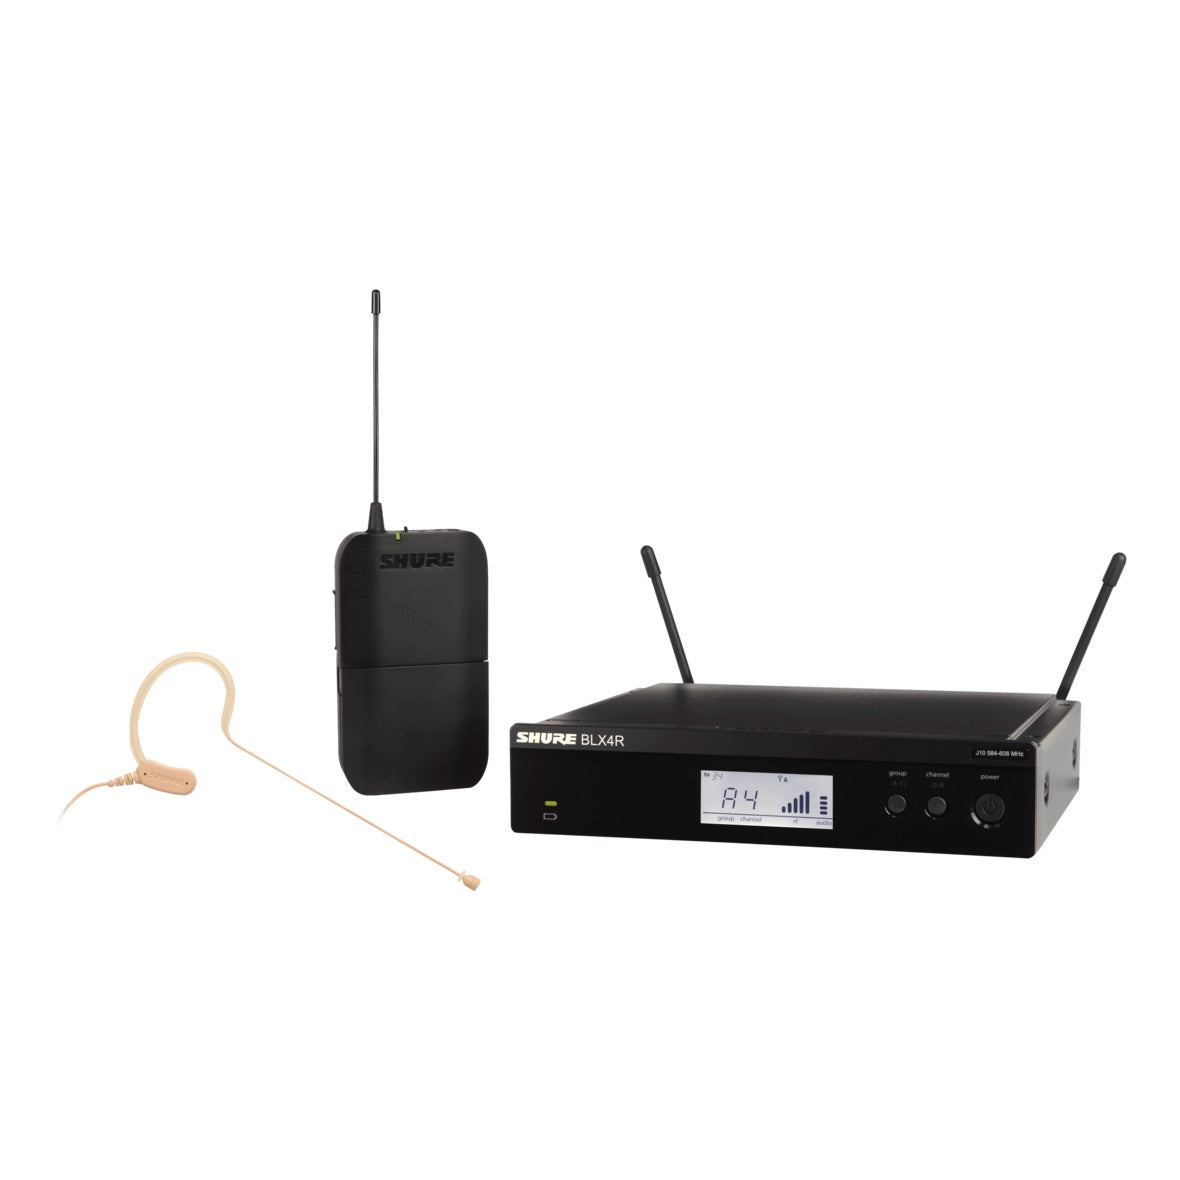 Shure BLX14R/MX53 - Wireless Rack-mount Presenter System with MX153 Earset Microphone